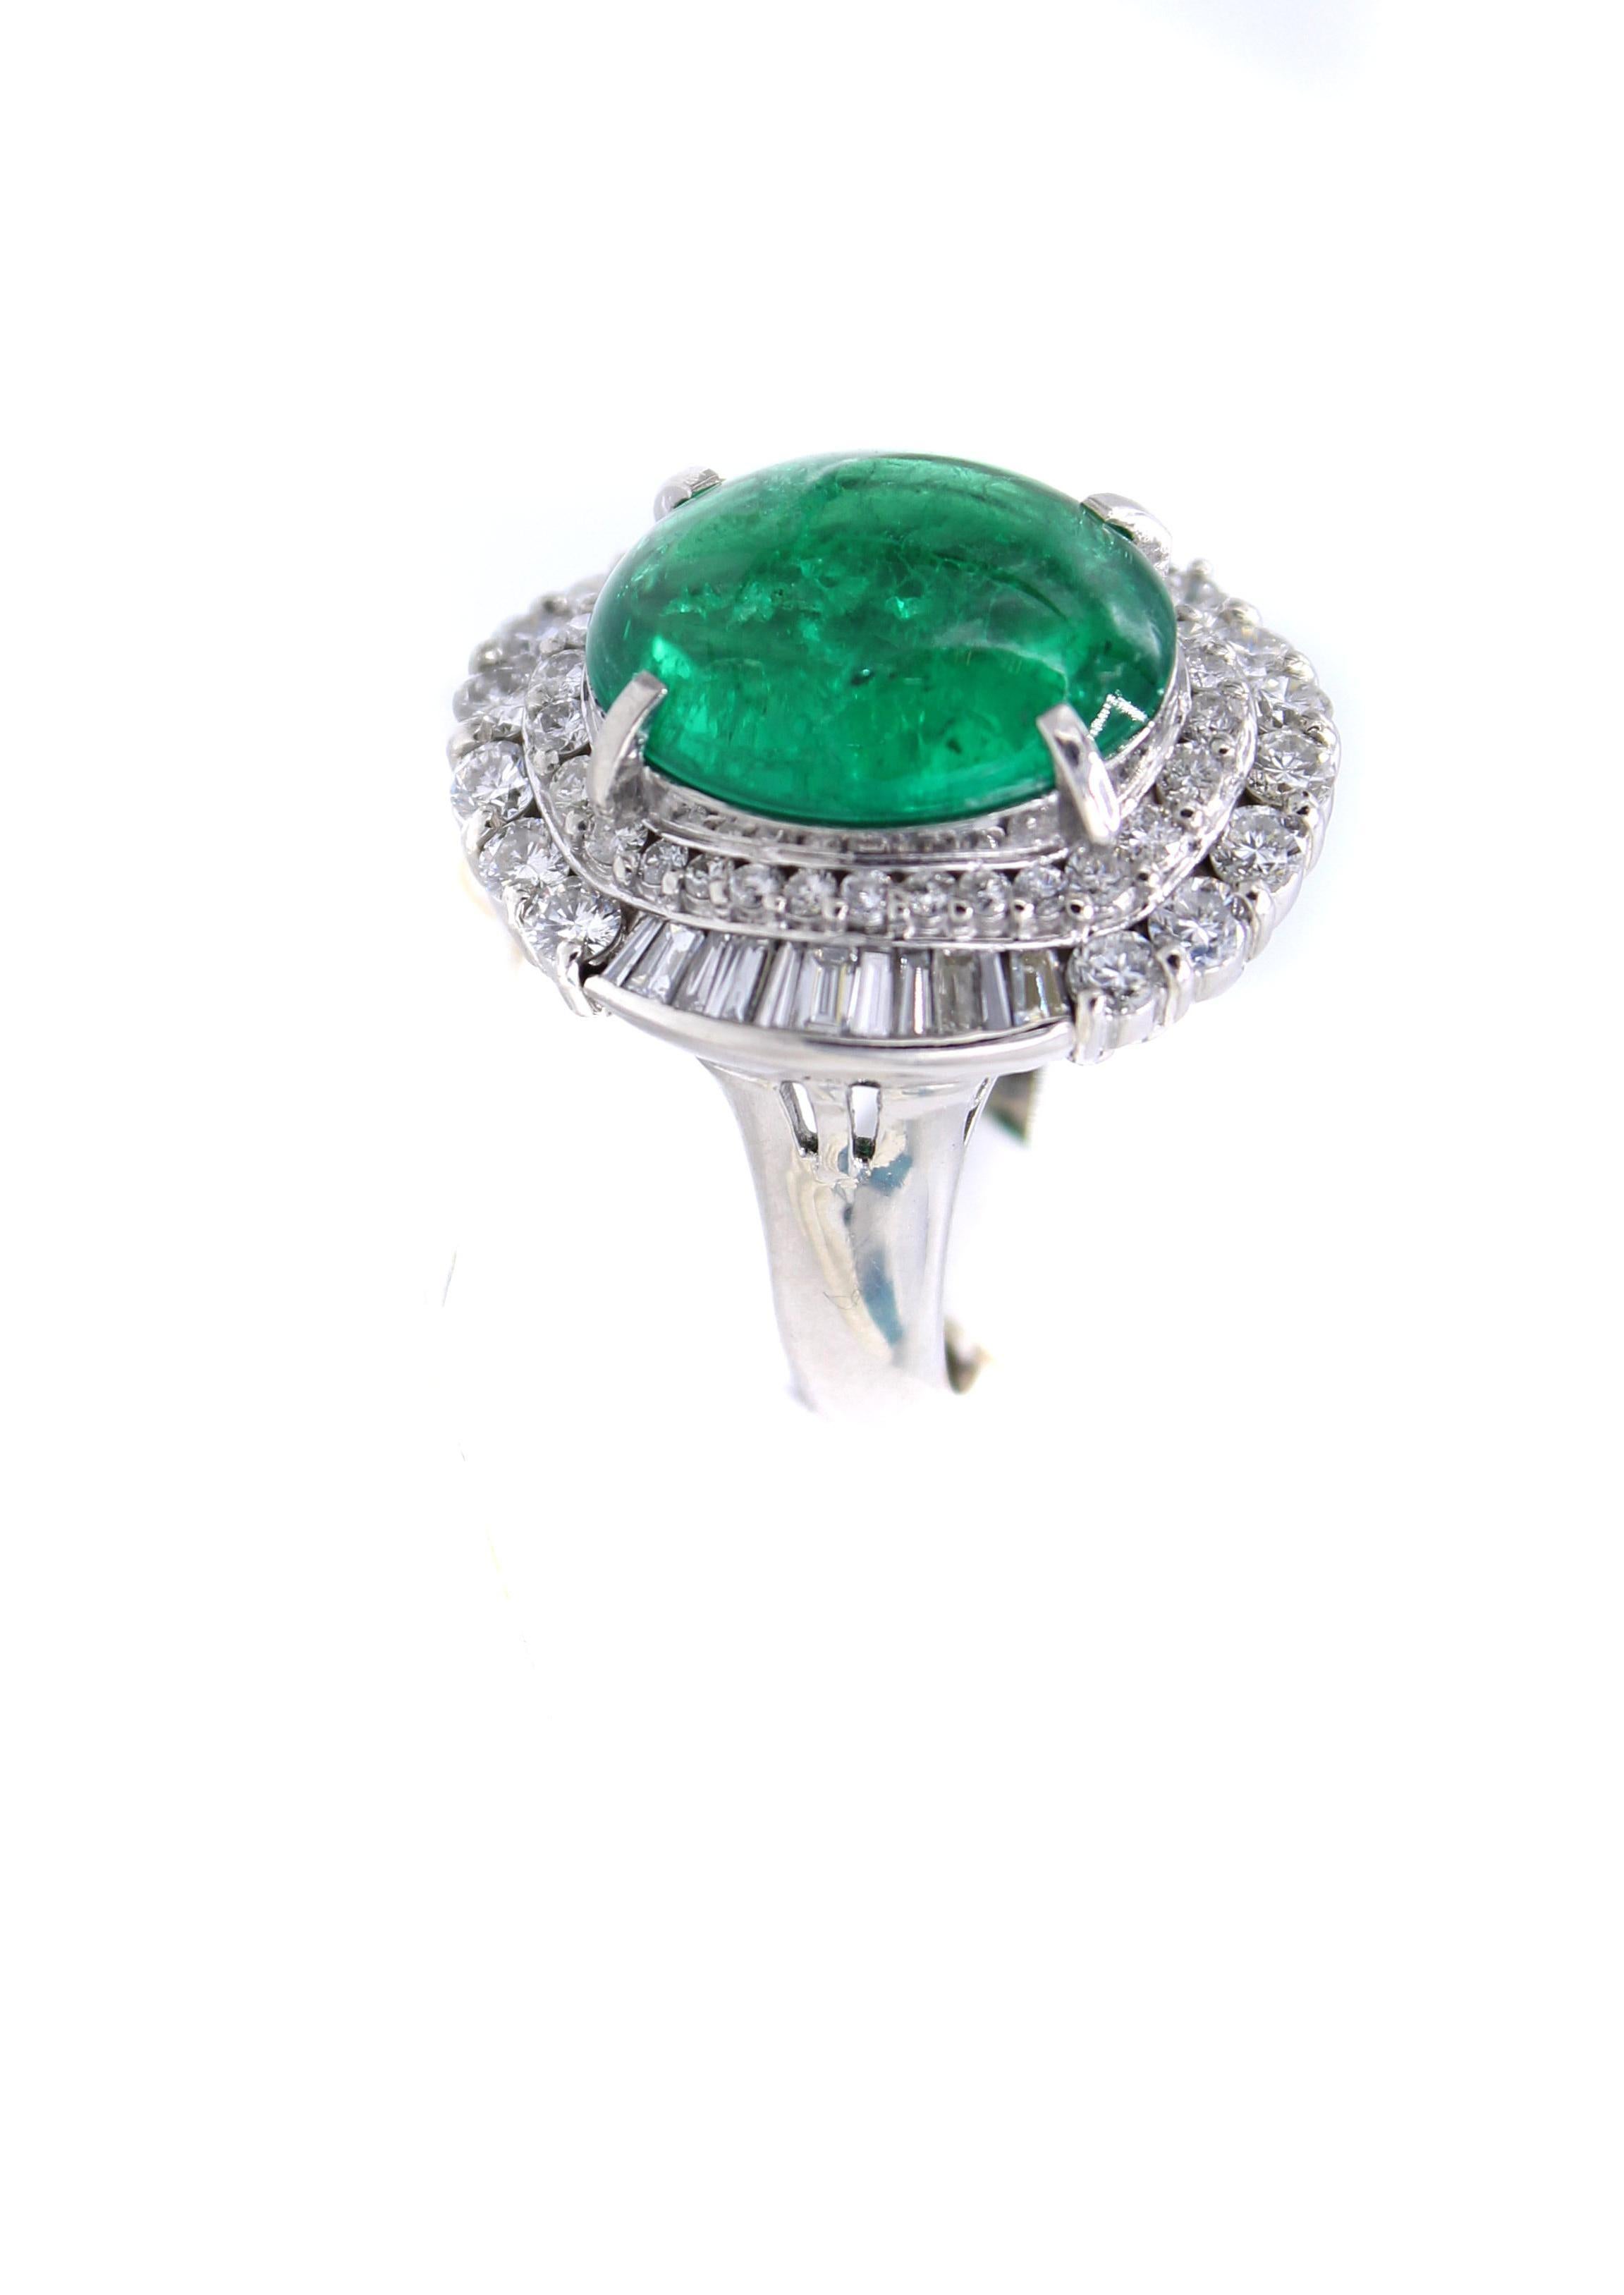 A luscious forest green cabochon emerald weighing 5.01 carats is the centerpiece of this bold platinum 1970s ring. The emerald comes with a report from the AGL. Embellishing the center gem are beautifully matched bright white round brilliant cut and